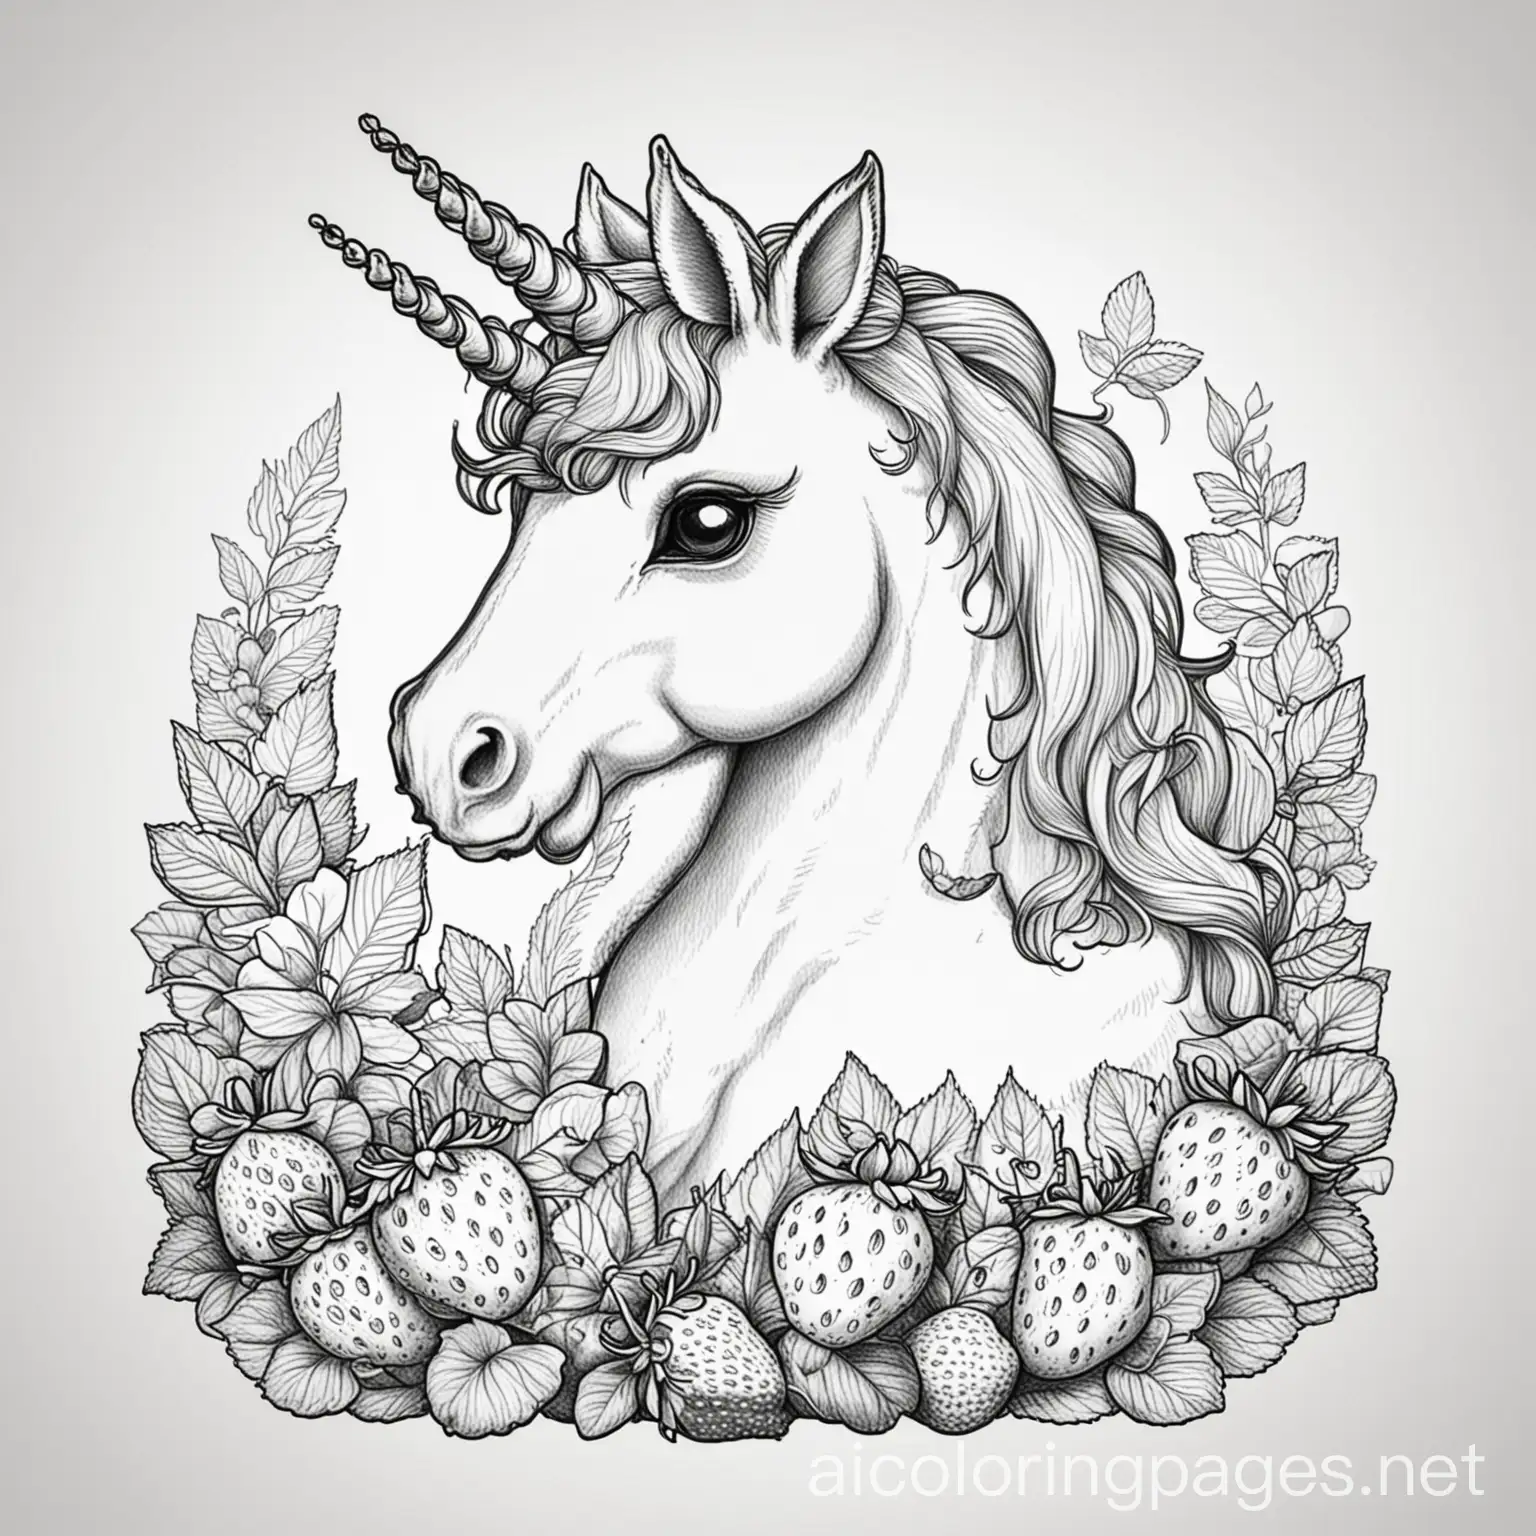 Unicorn-Holding-Strawberries-Coloring-Page-with-Simplicity-and-Ample-White-Space